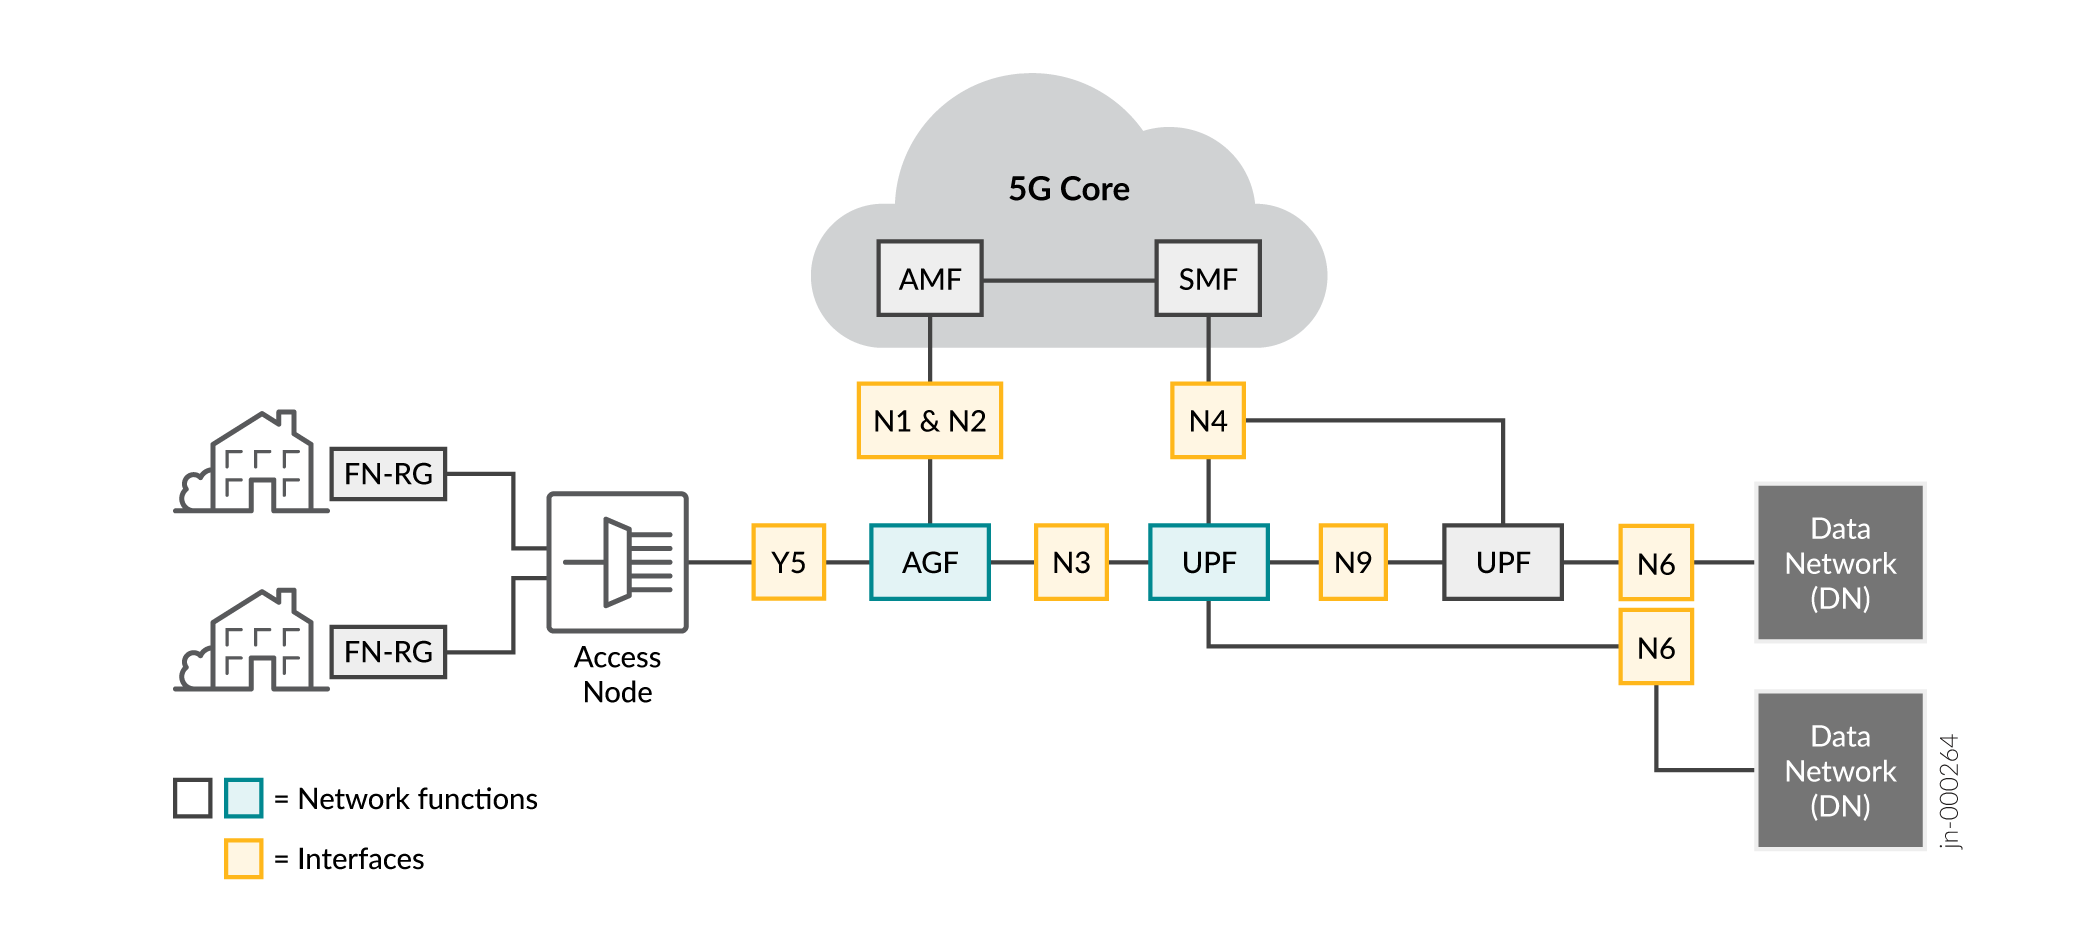 Components in a 5GC Network